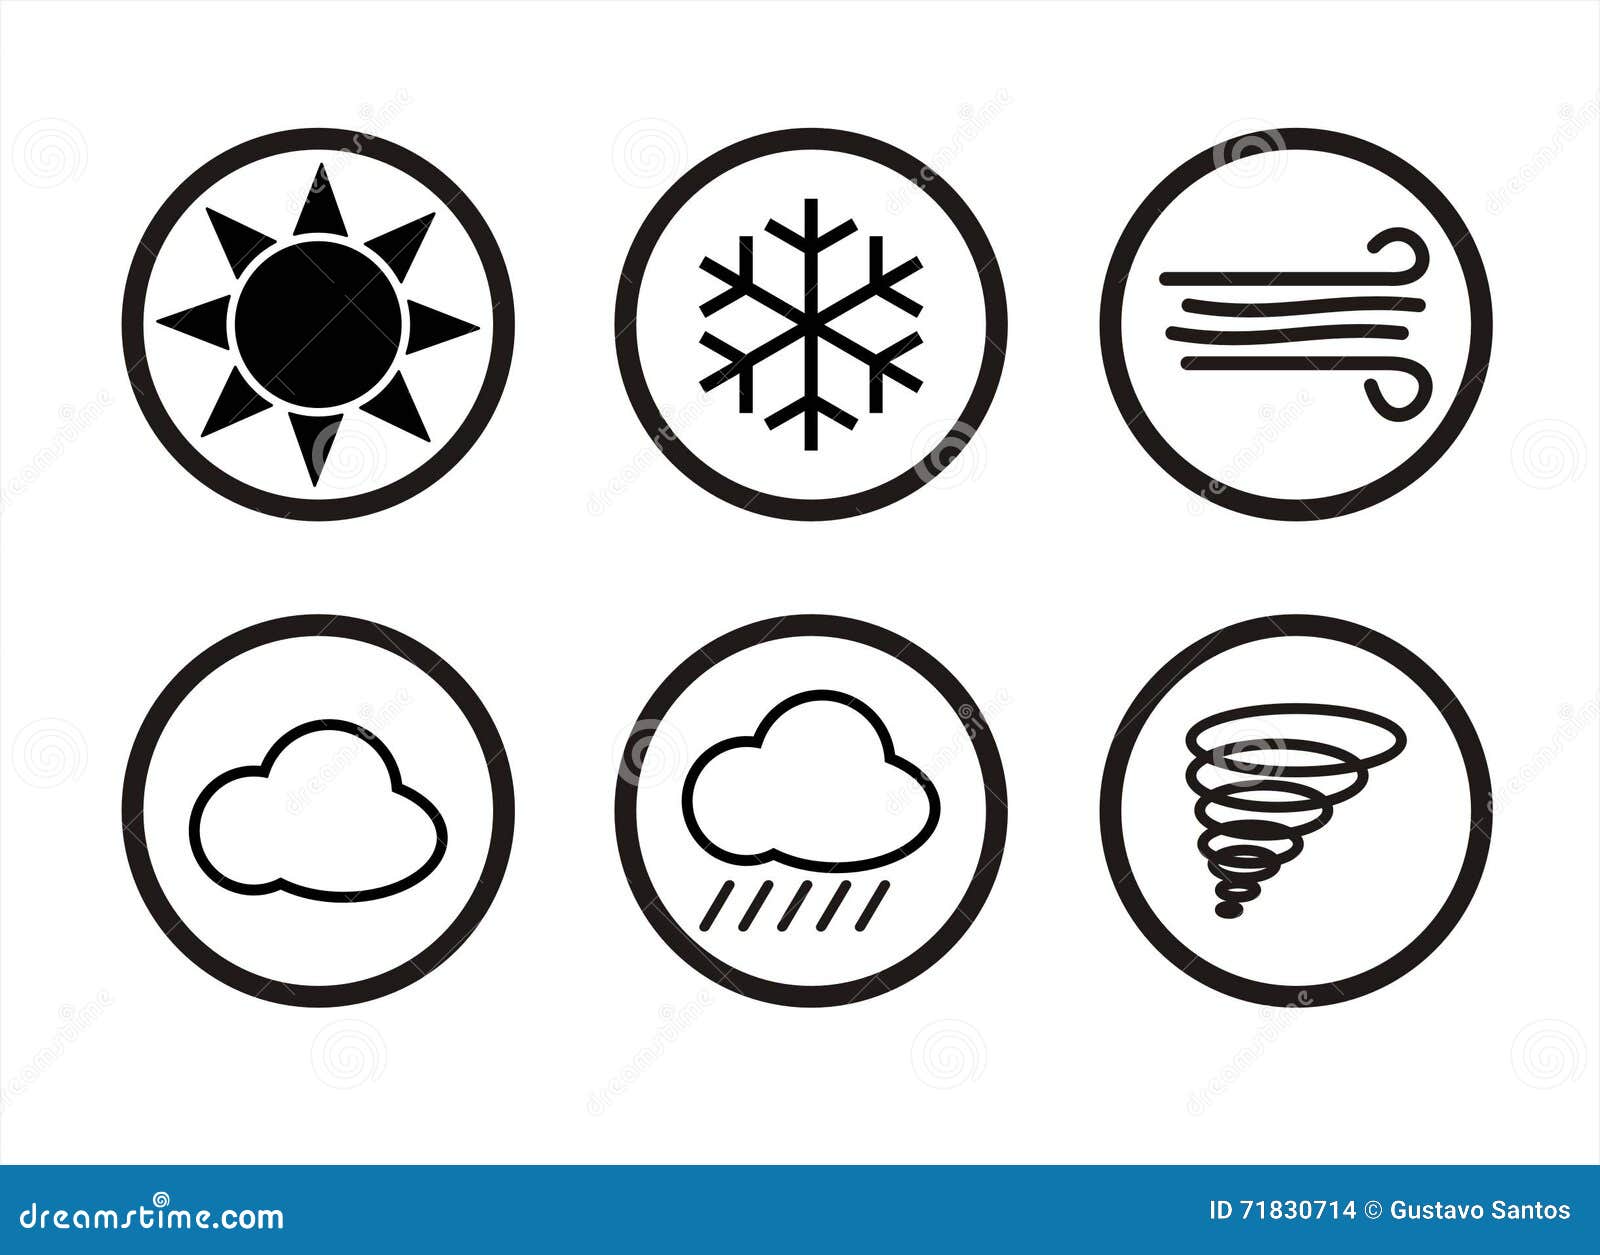 Weather Forecast Icons stock vector. Illustration of weather - 71830714